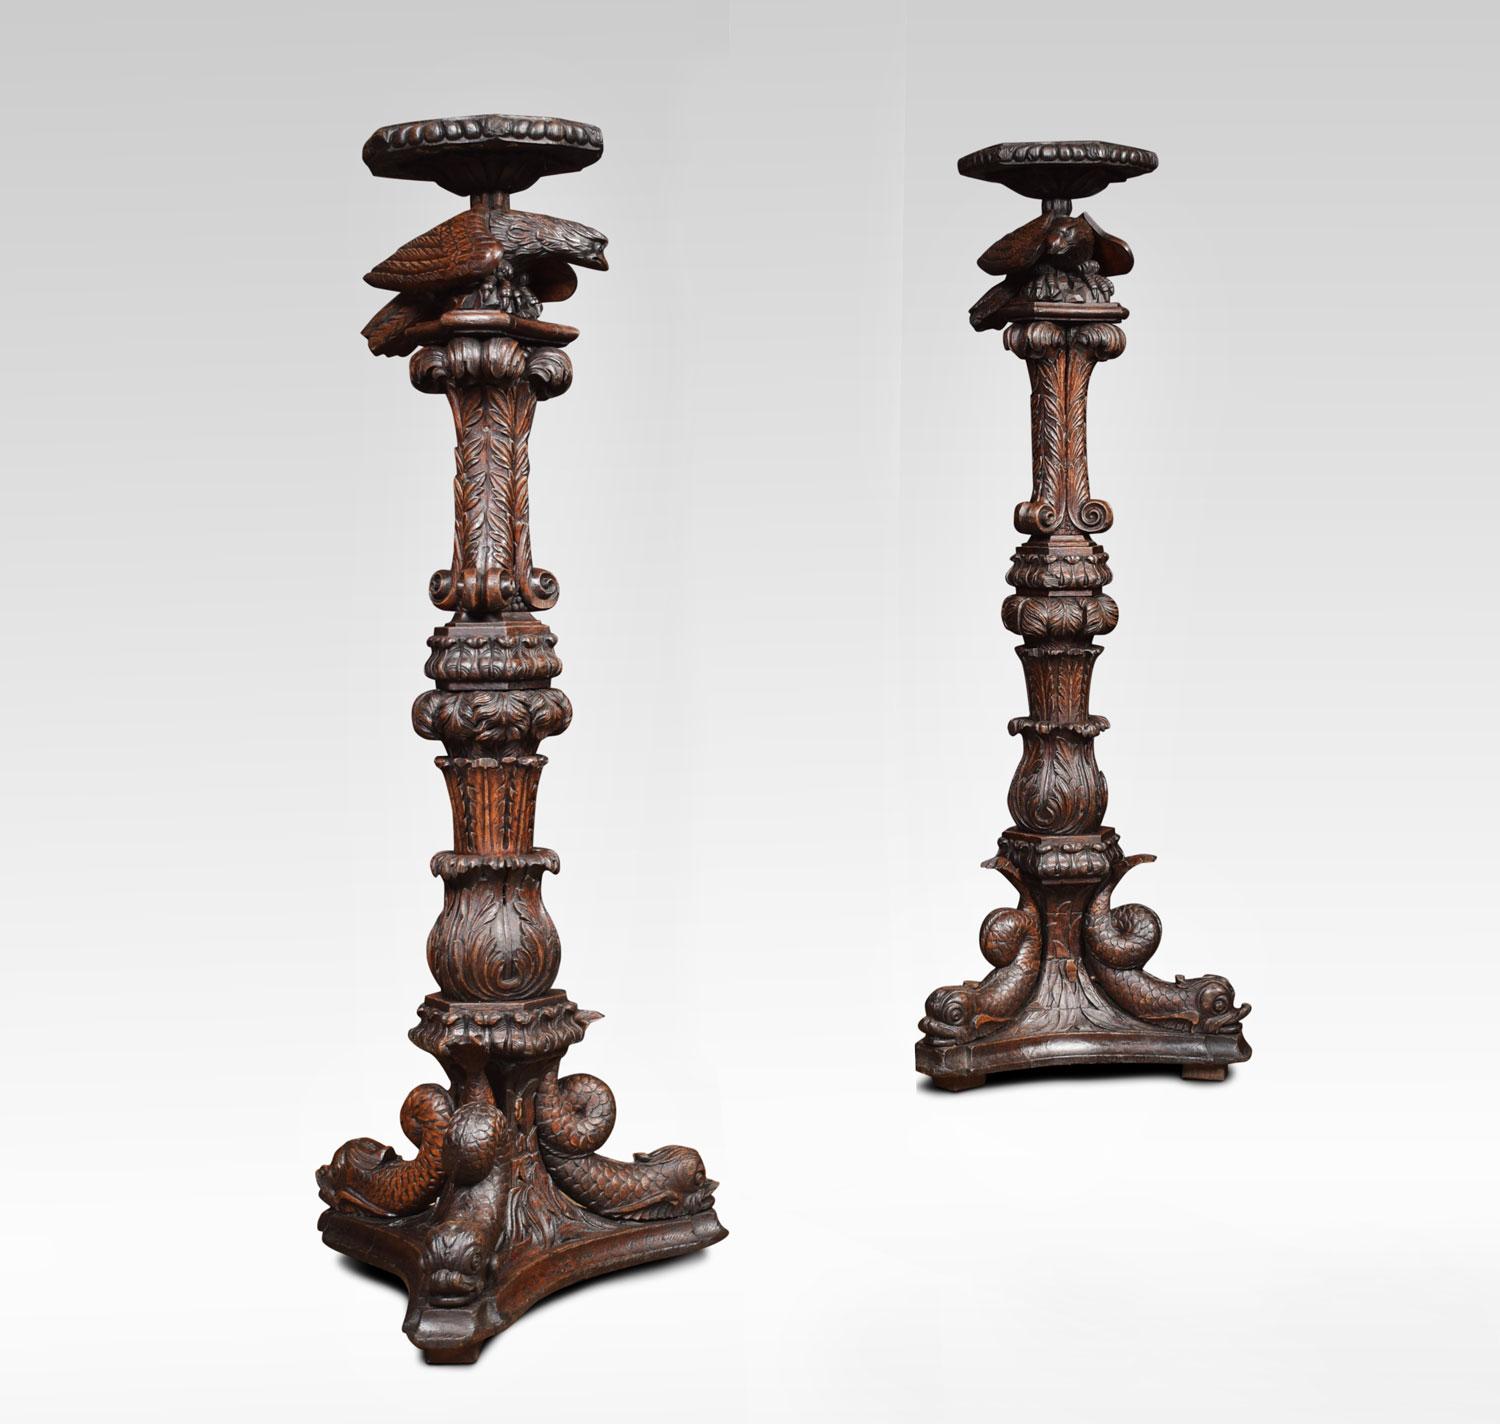 Pair of Jacobean stands, profusely carved having eagles above acanthus scrolling columns. The dolphin bases with moulded plinth.
Dimensions:
Height 53 inches
Width 20.5 inches
Depth 20.5 inches.